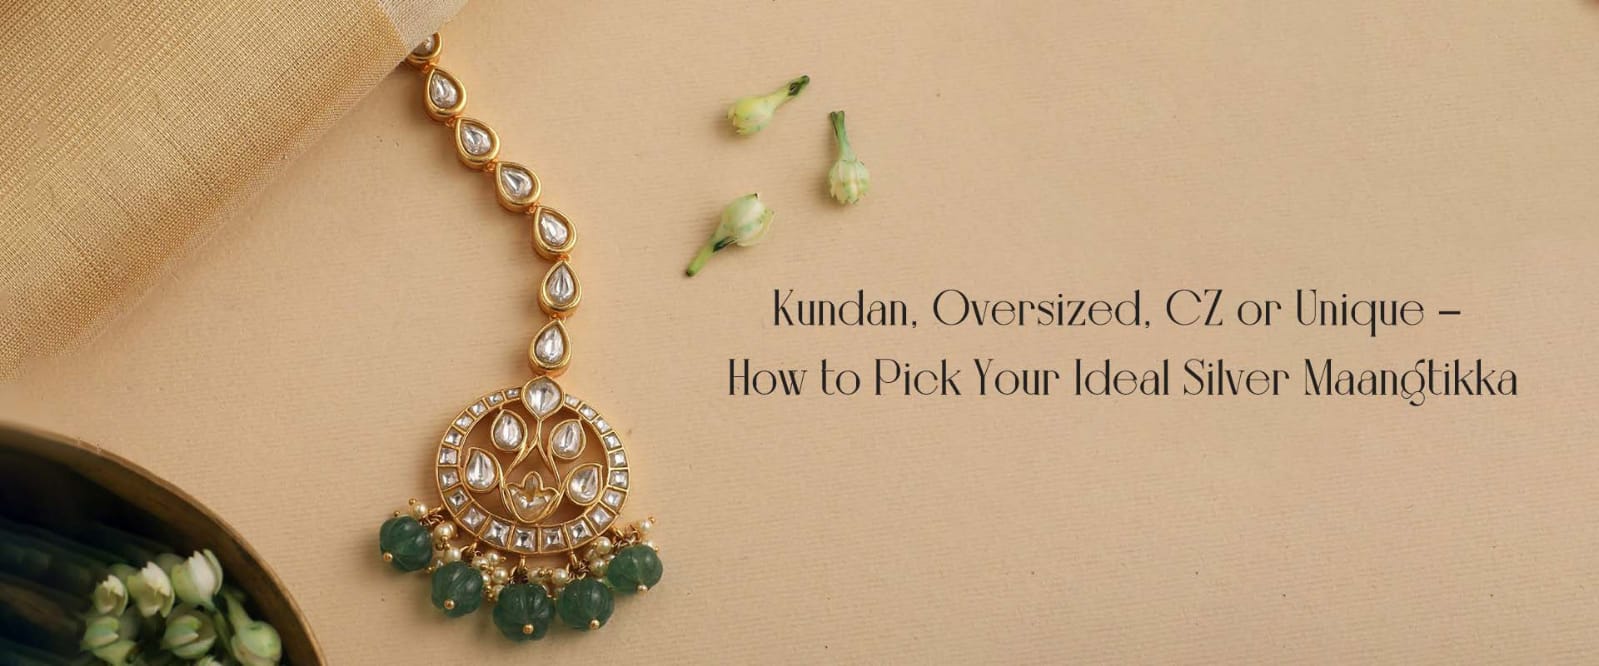 Kundan, Oversized, CZ or Unique – How to Pick Your Ideal Silver Maangtikka